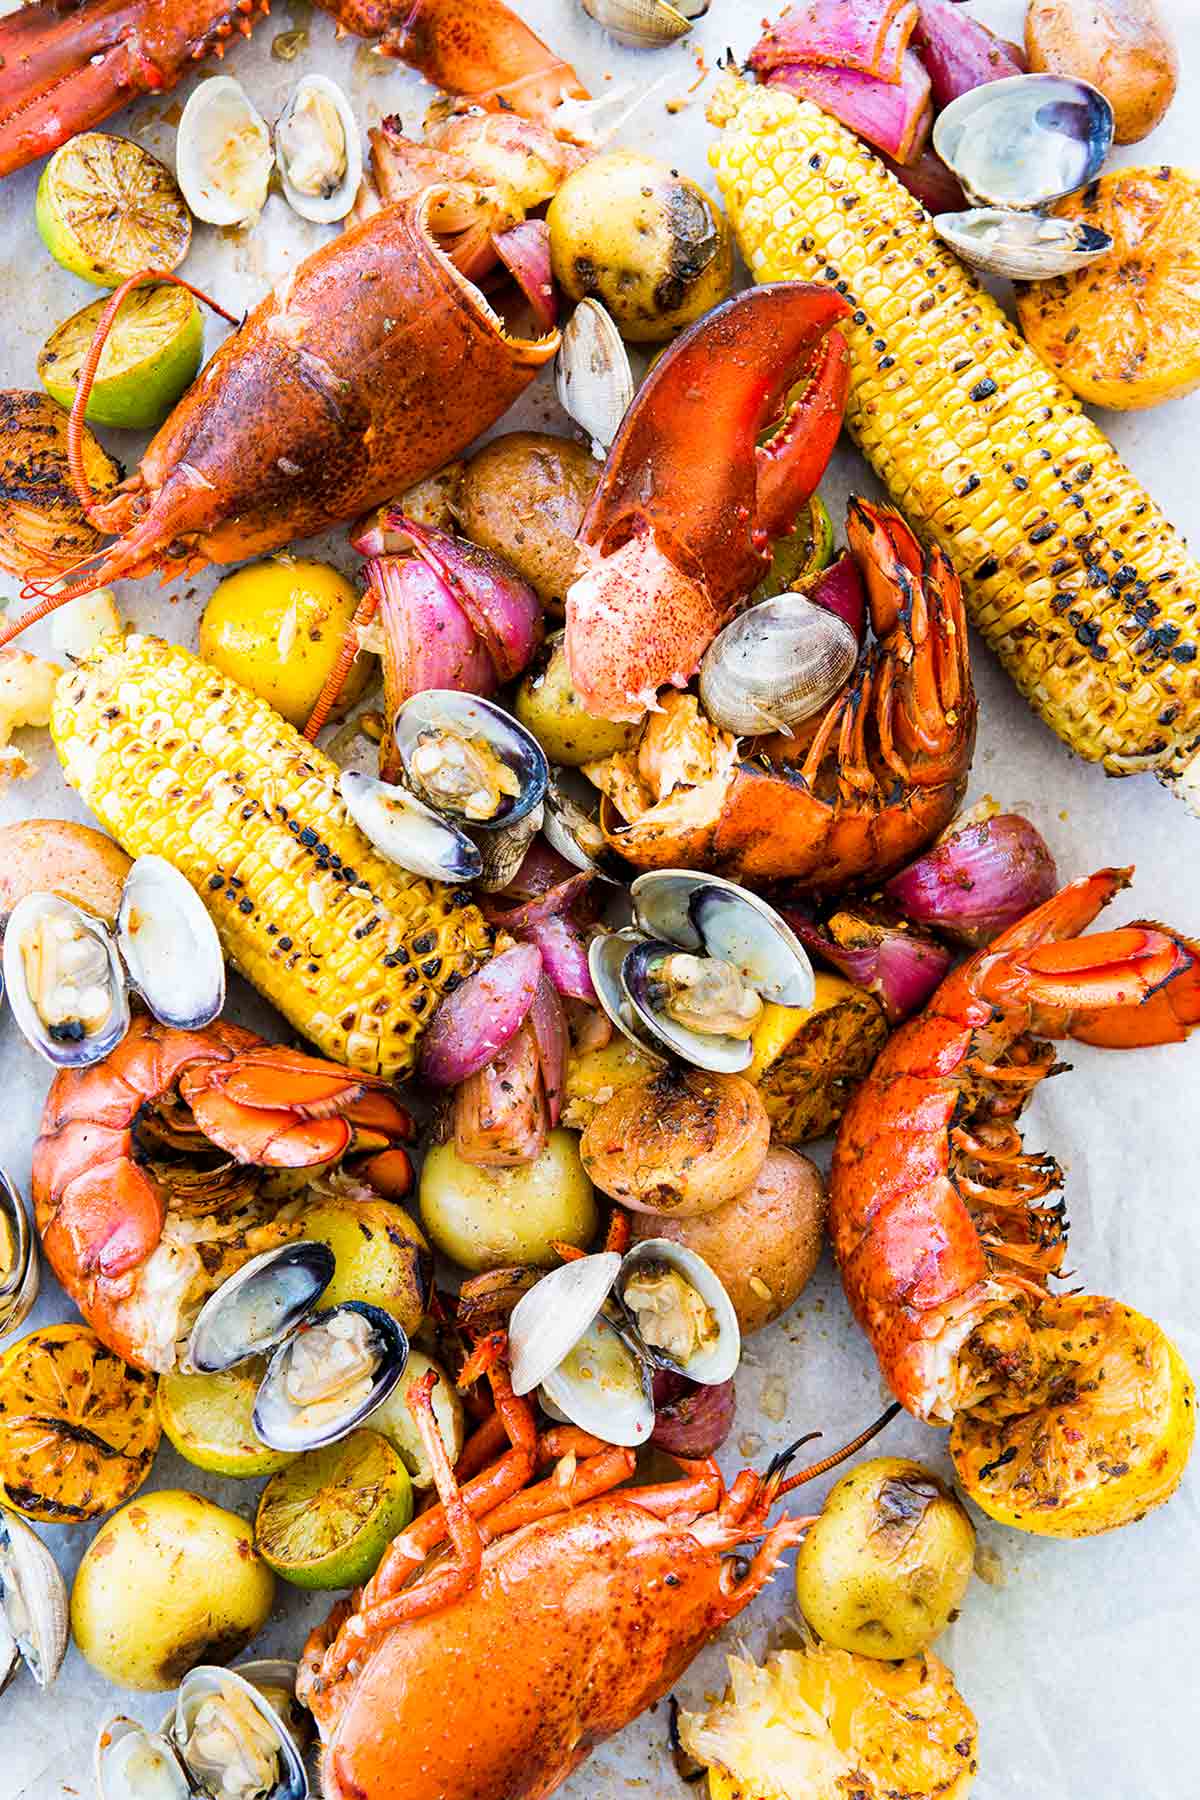 All the fixings for a New England clambake - lobster, clams, potatoes, corn, lemon - scattered on a white surface.